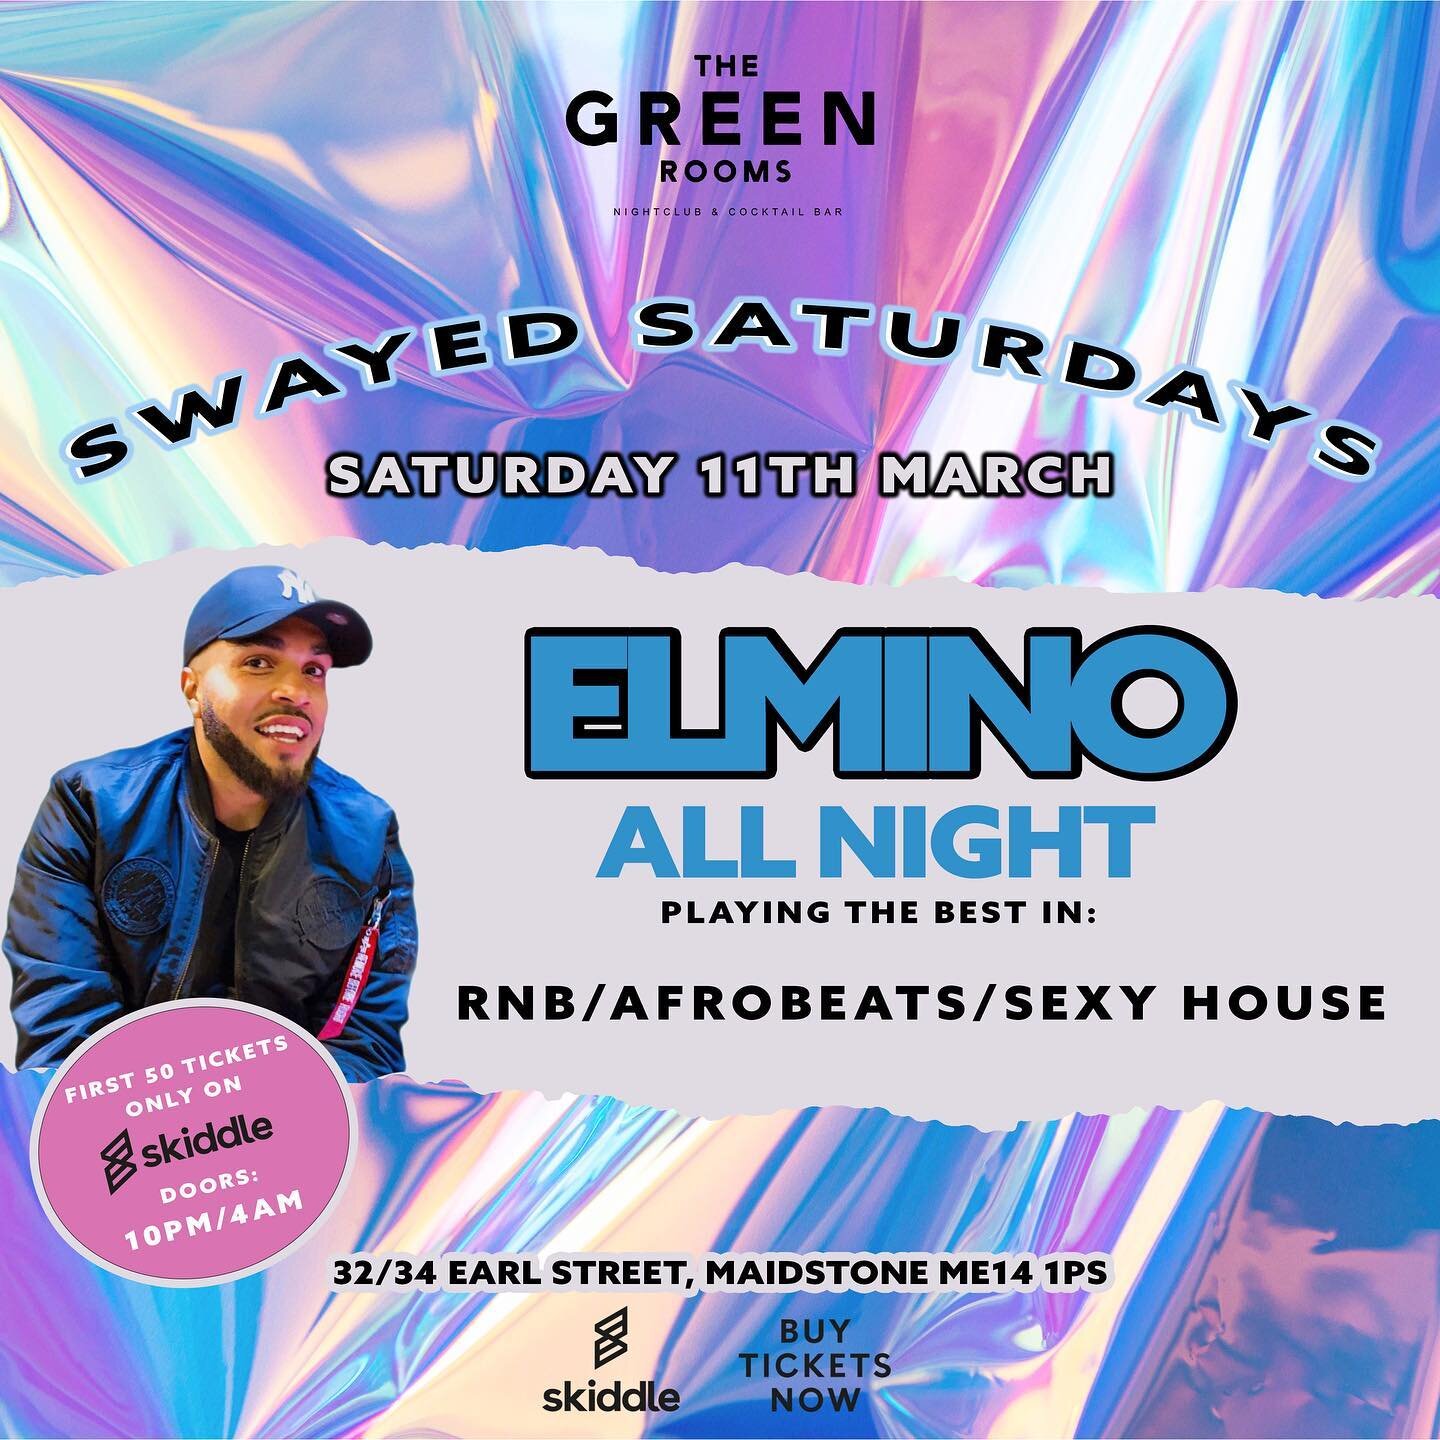 (First 50 Tickets free only on @skiddleuk) THIS SATURDAY CATCH @elmino_dj ALL NIGHT LONG!

Playing the very best in R&amp;B/HIPHOP/AFROBEATS &amp; VOCAL HOUSE. 

There&rsquo;s something for everyone with this international DJ (Ibiza/Greece Resident)
